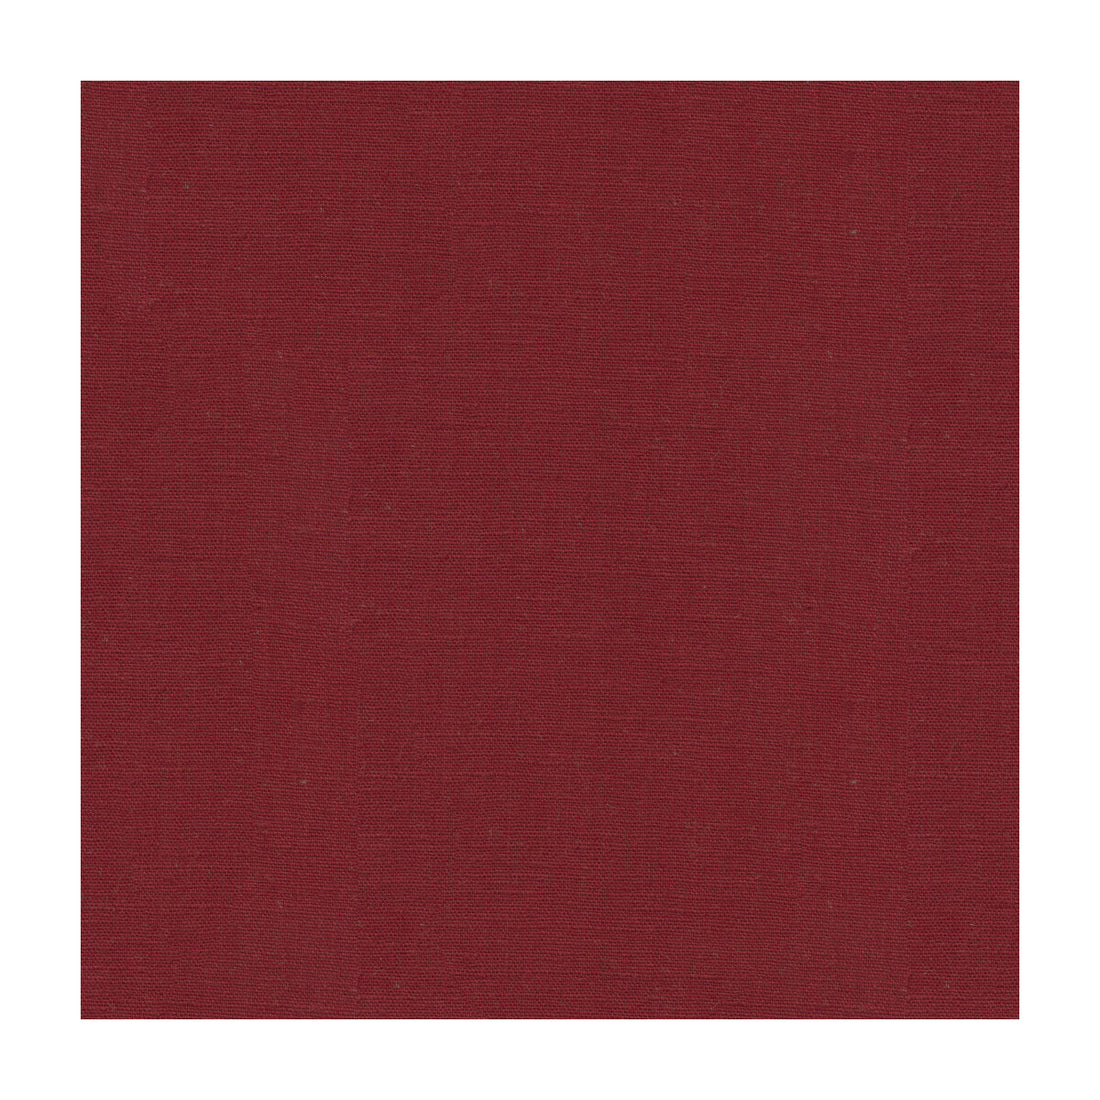 Dublin fabric in lipstick color - pattern 32344.919.0 - by Kravet Basics in the Perfect Plains collection